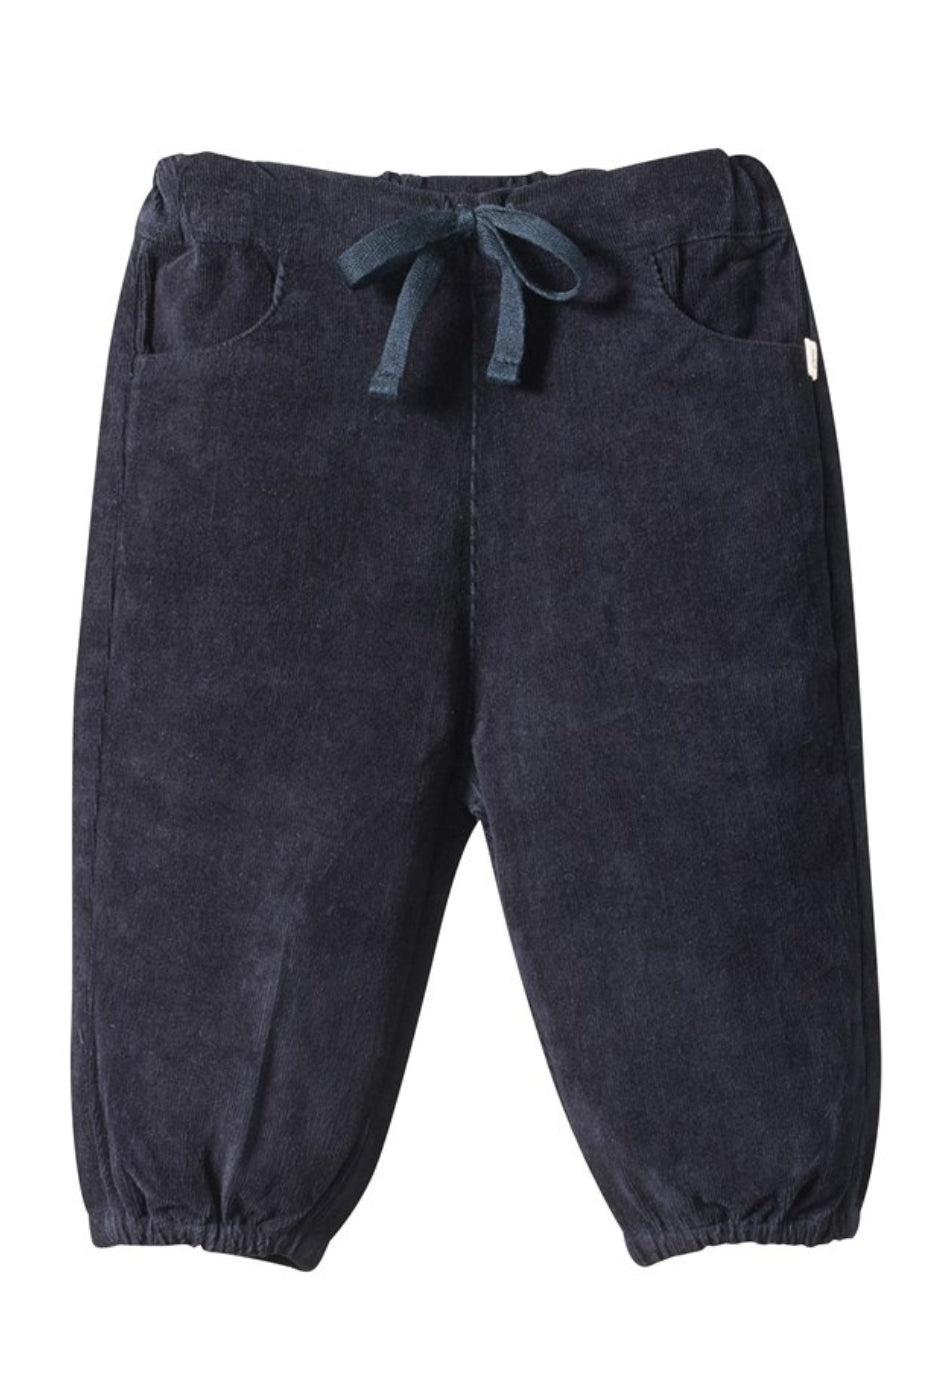 Frankie Cord Pants - Navy-NATURE BABY-P&K The General Store